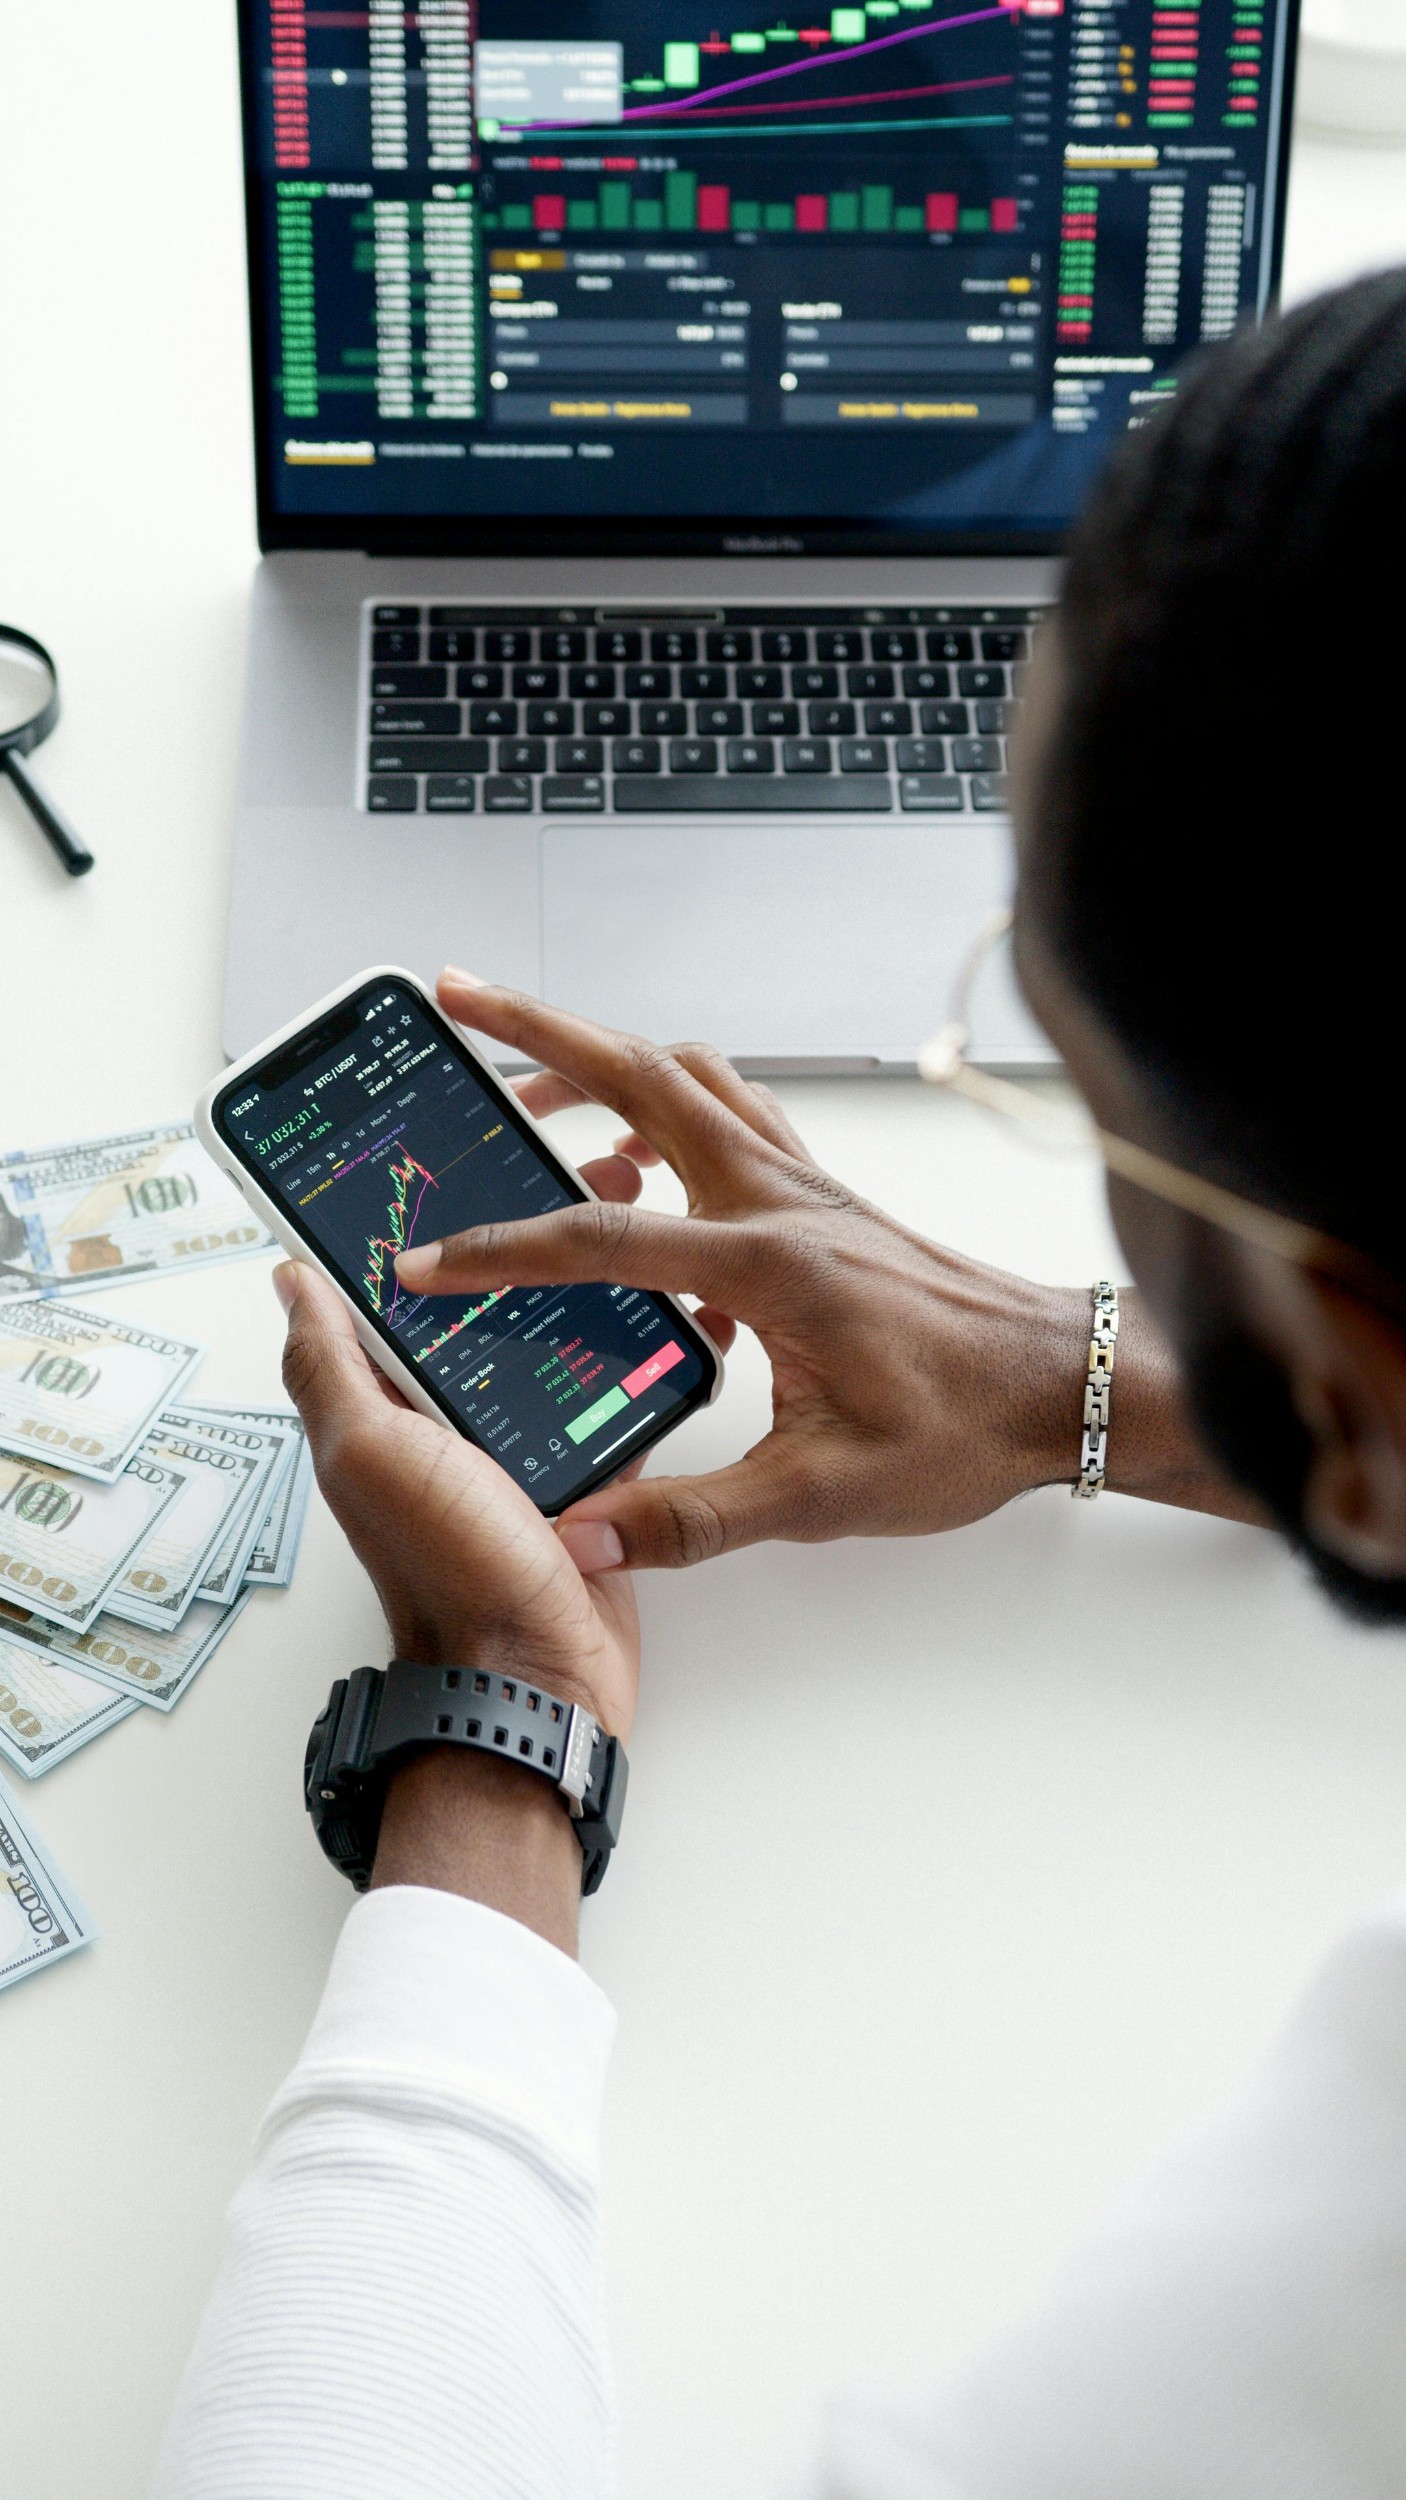 Photo is taking over the shoulder of a black man. They are looking at an investment app on their smart phone. In the background on the table is a pile of cash and a macbook open to an investment app.